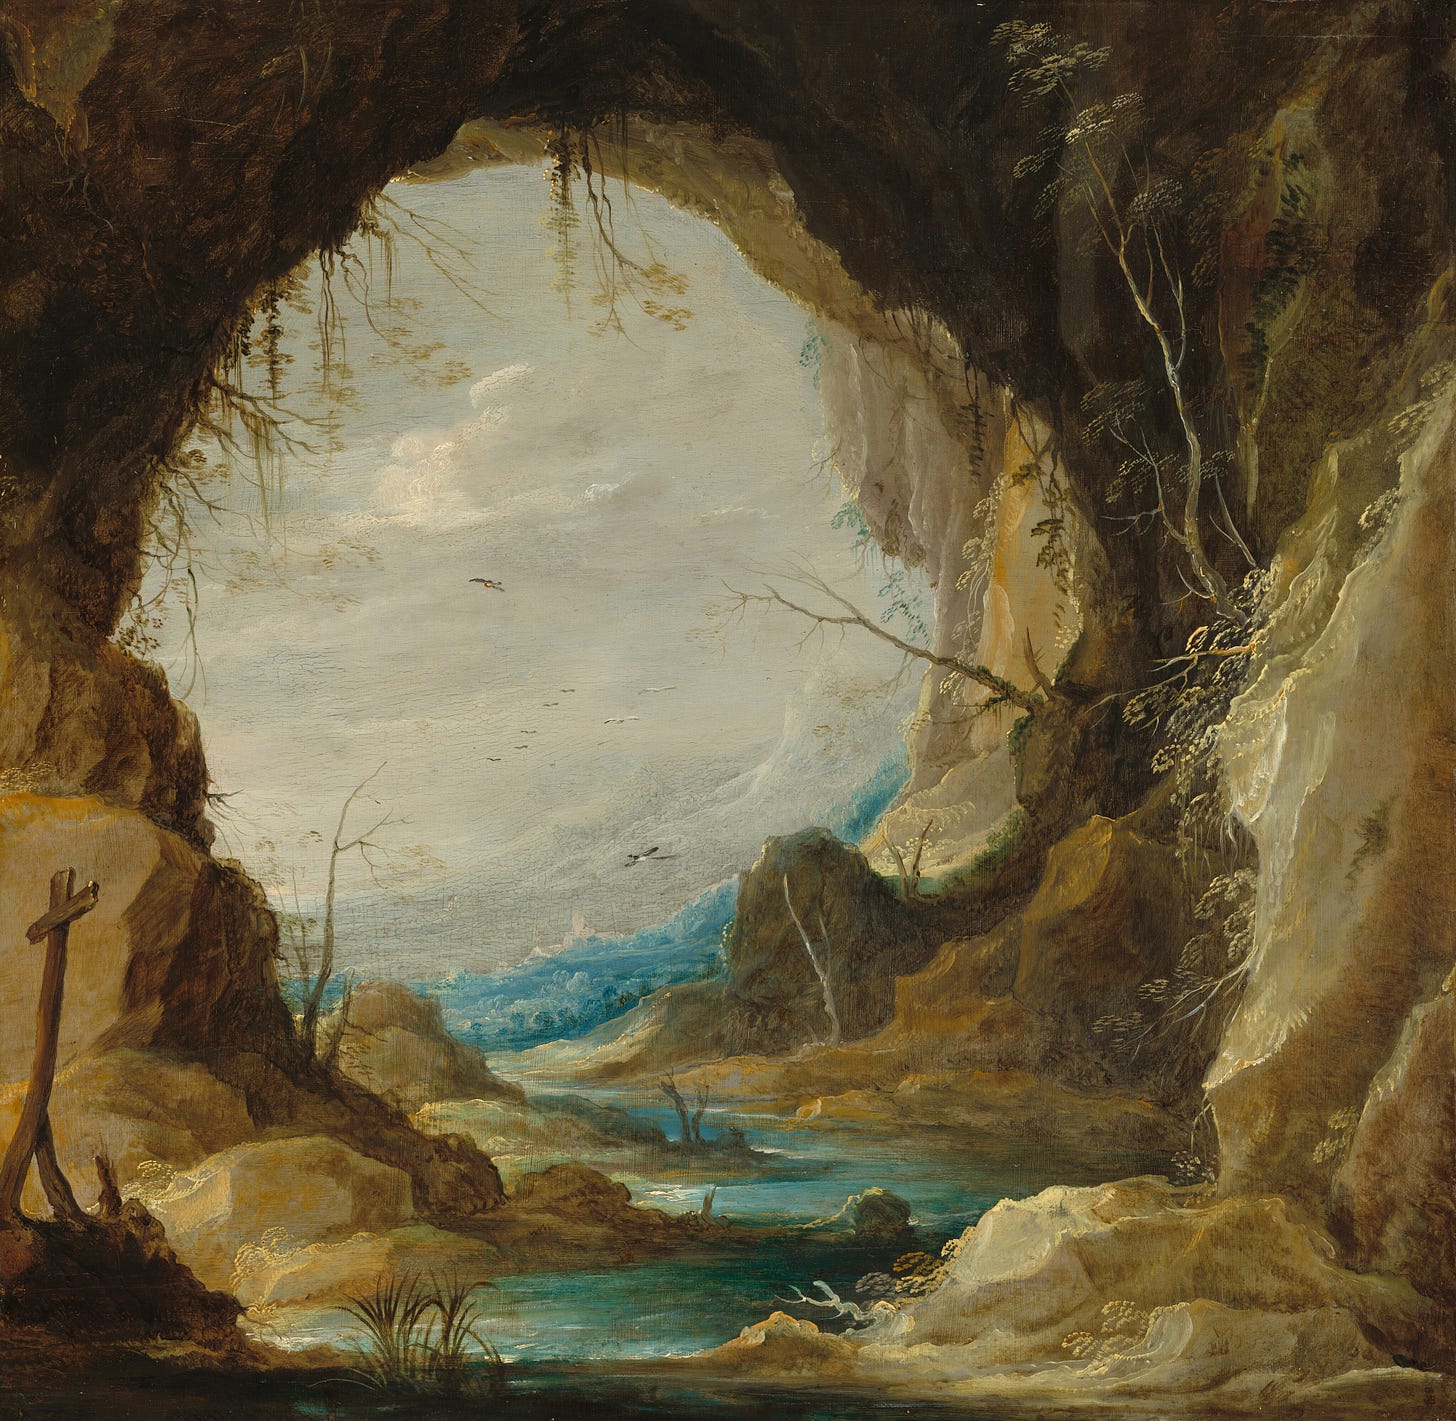 Vista from a Grotto, early 1630s by David Teniers the Younger